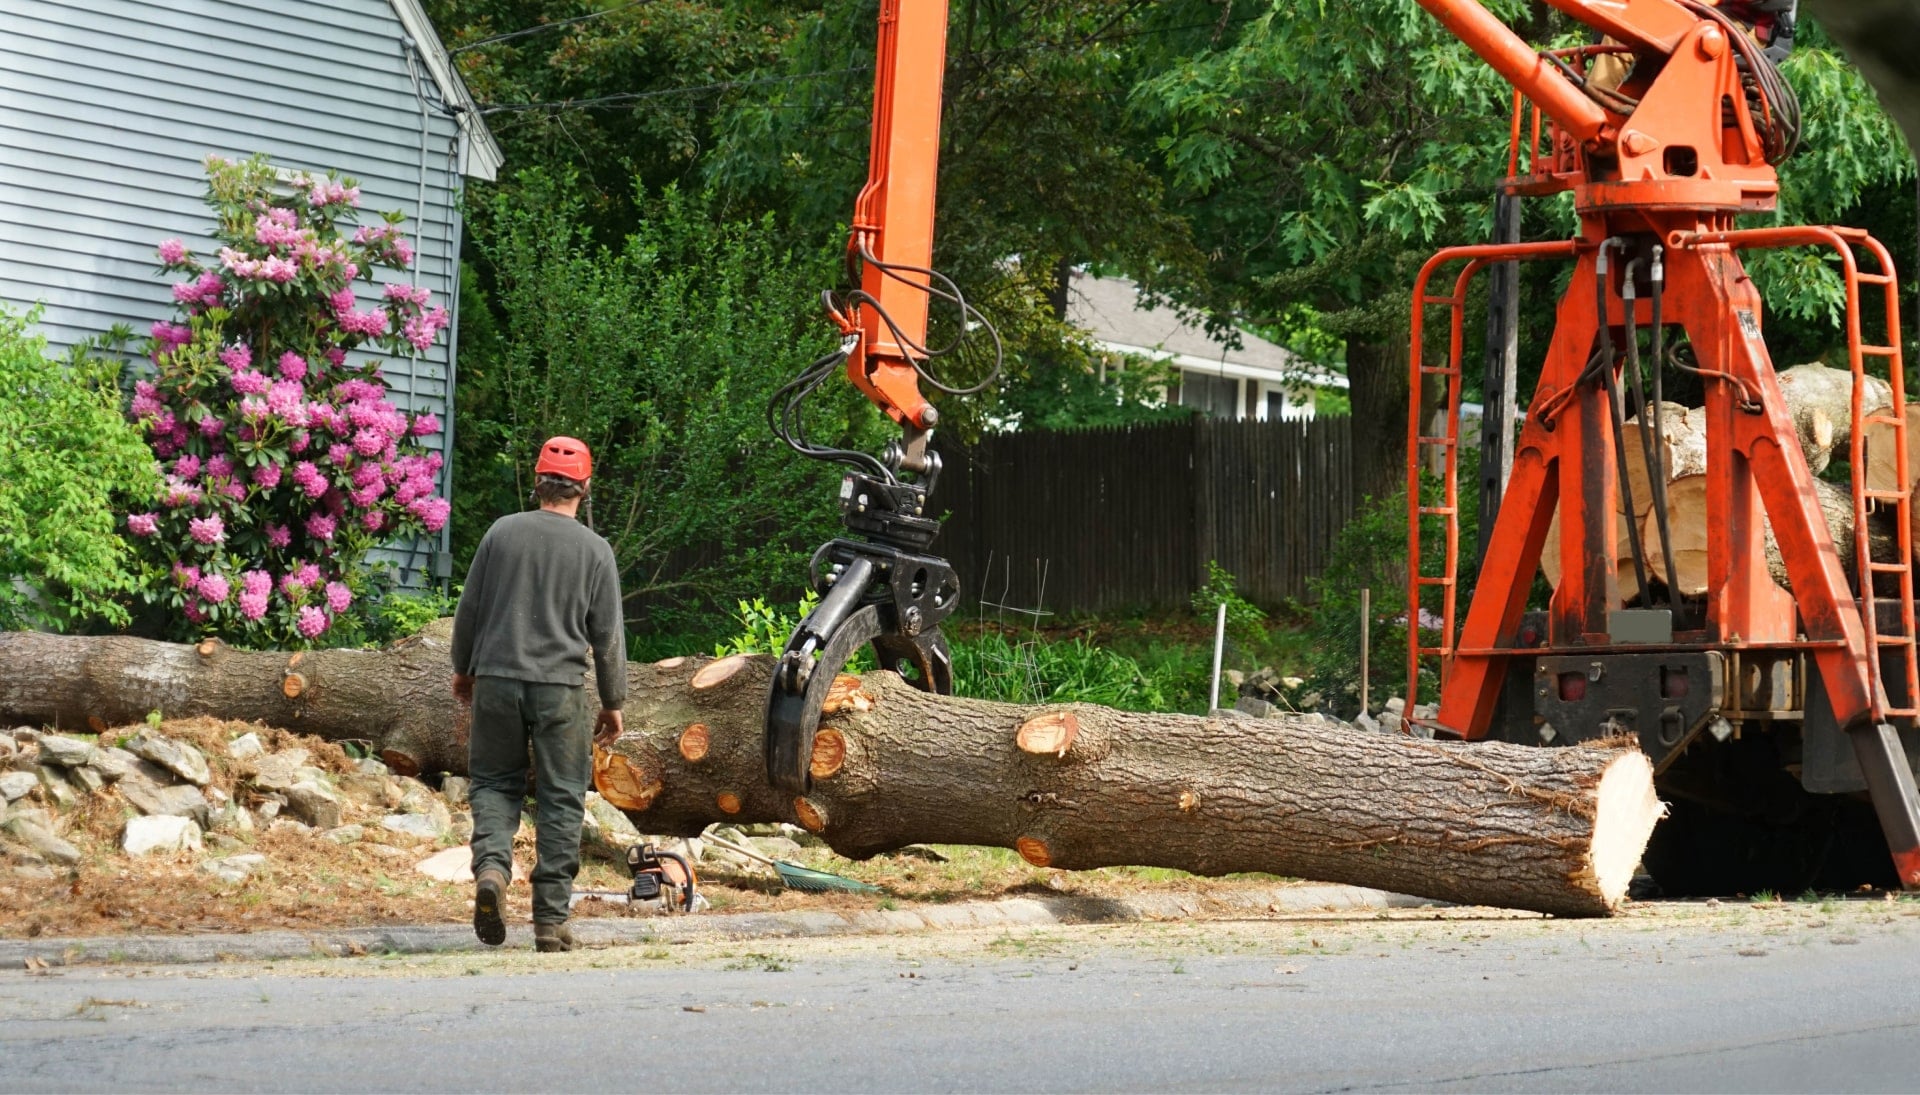 Local partner for Tree removal services in New Jersey